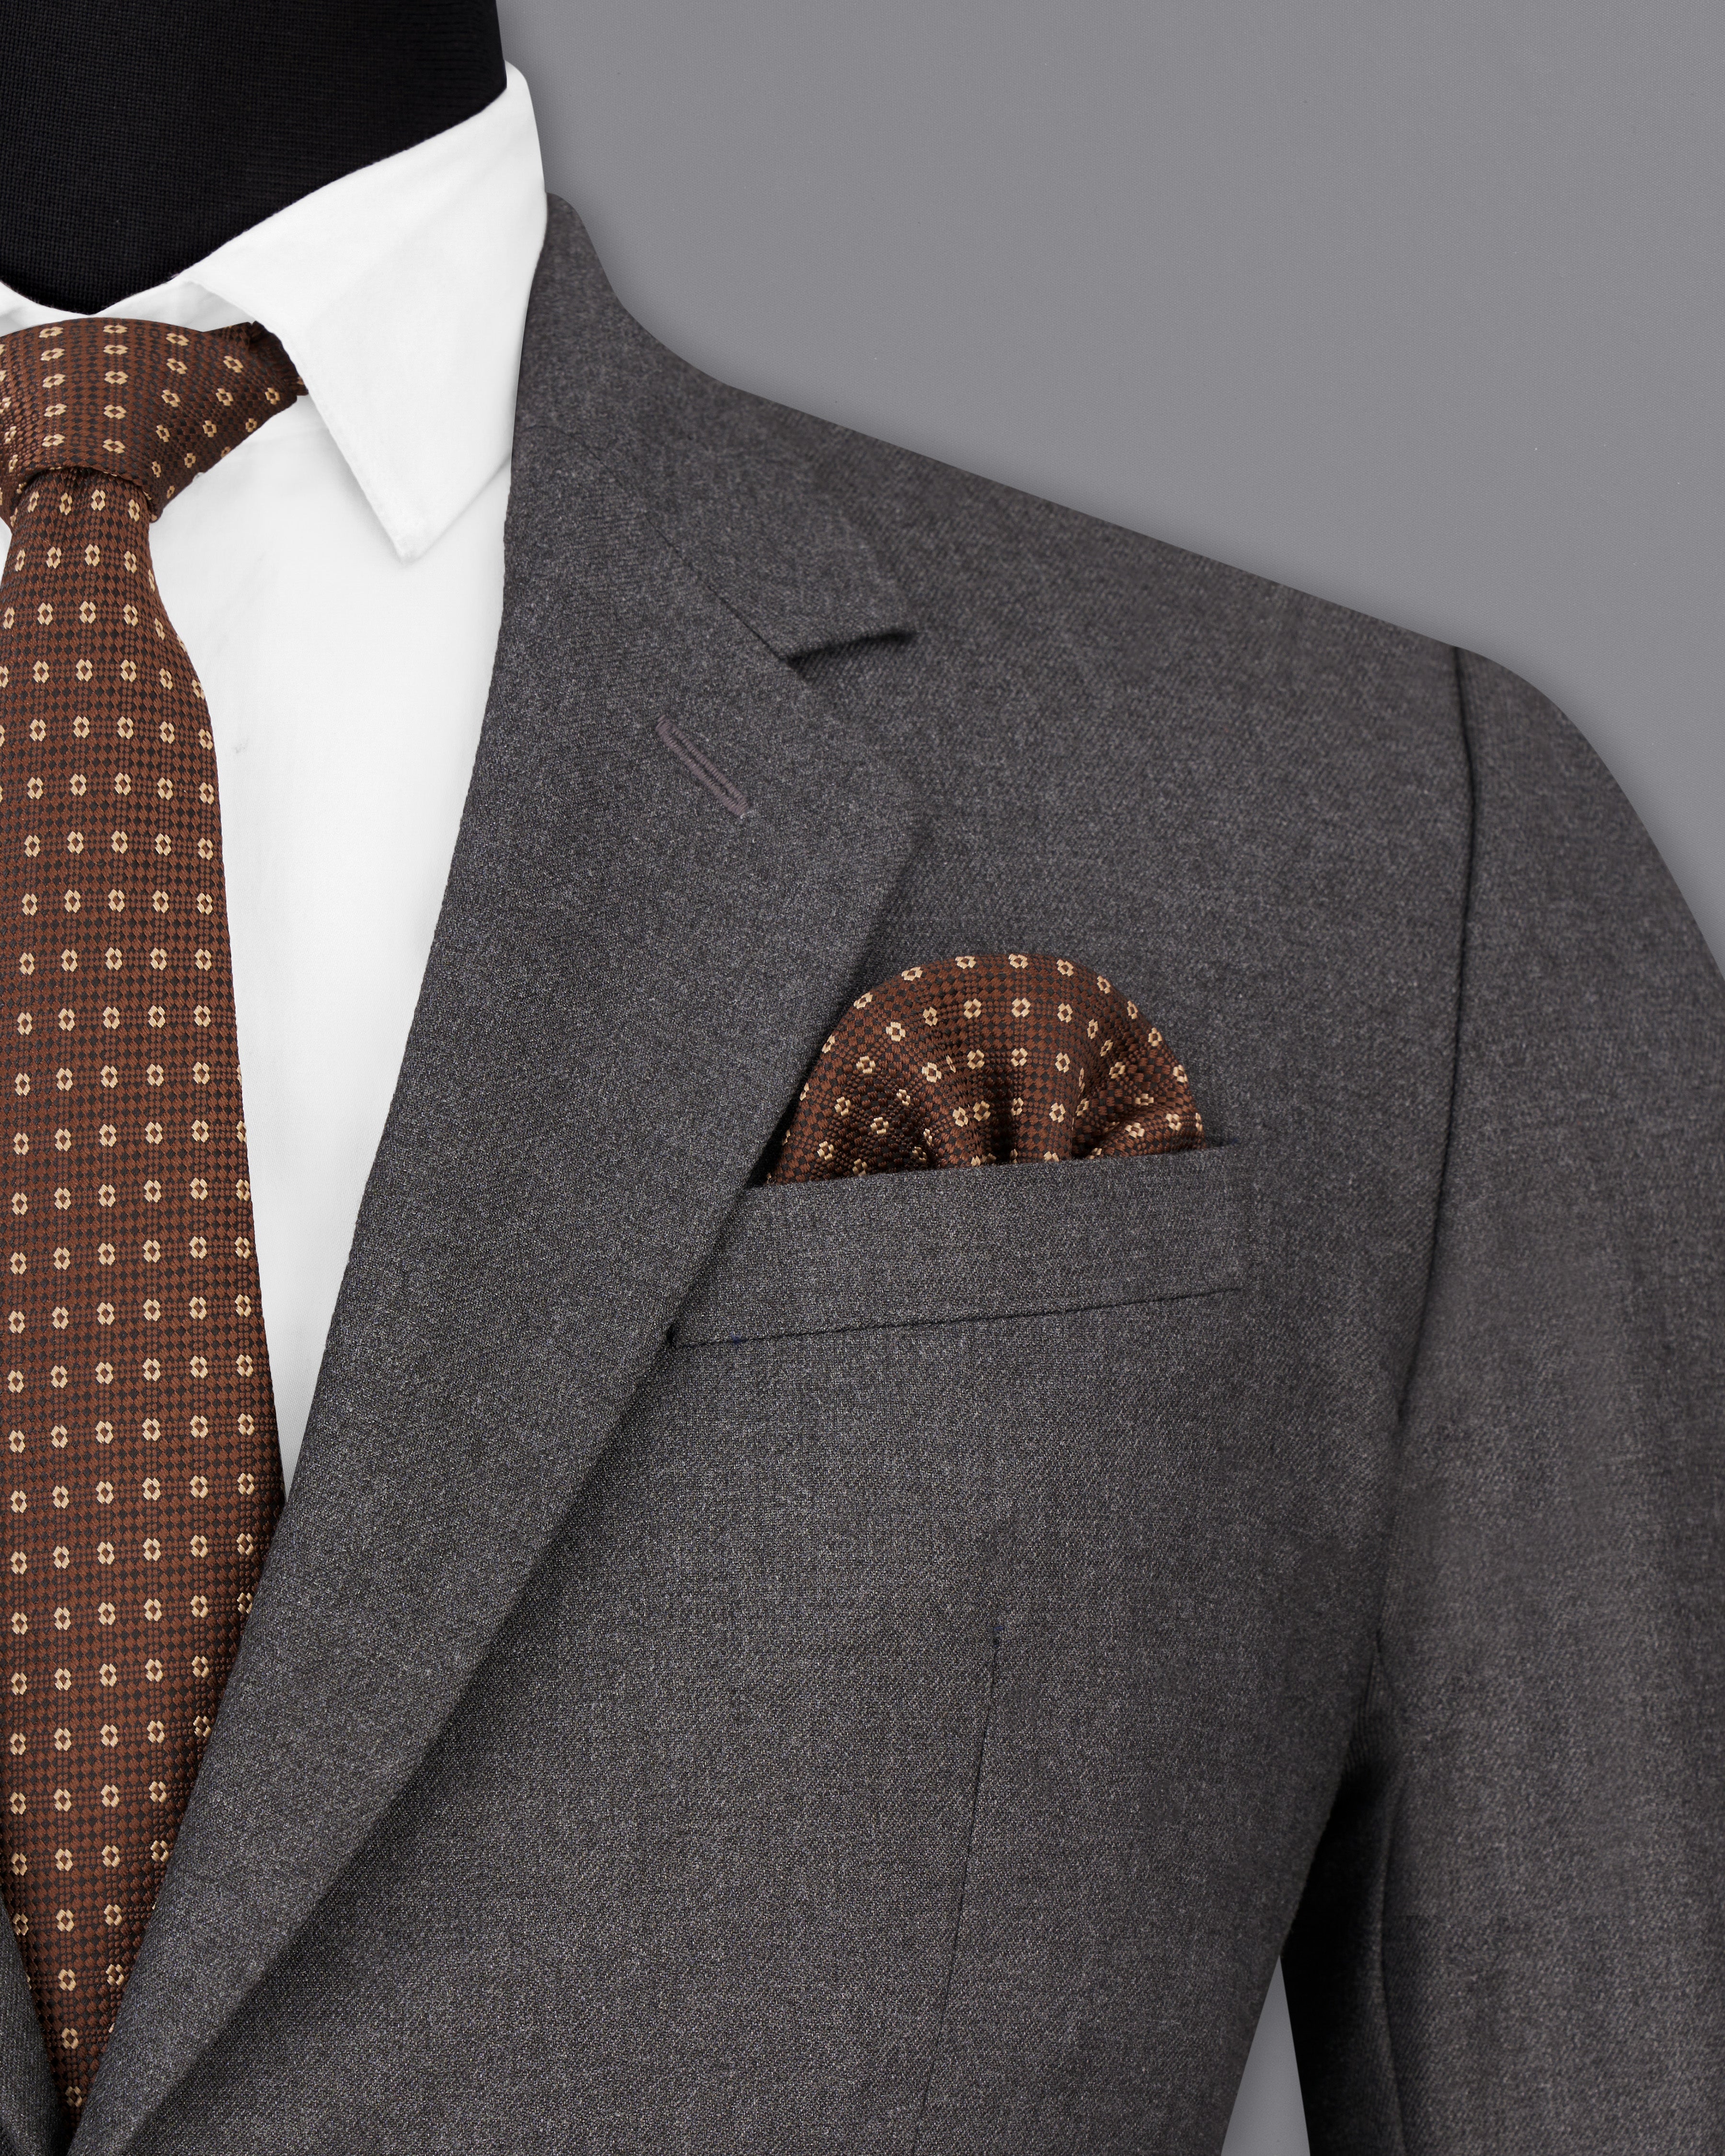 Gravel Gray Wool Rich Single Breasted Suit ST2507-SB-36, ST2507-SB-38, ST2507-SB-40, ST2507-SB-42, ST2507-SB-44, ST2507-SB-46, ST2507-SB-48, ST2507-SB-50, ST2507-SB-52, ST2507-SB-54, ST2507-SB-56, ST2507-SB-58, ST2507-SB-60